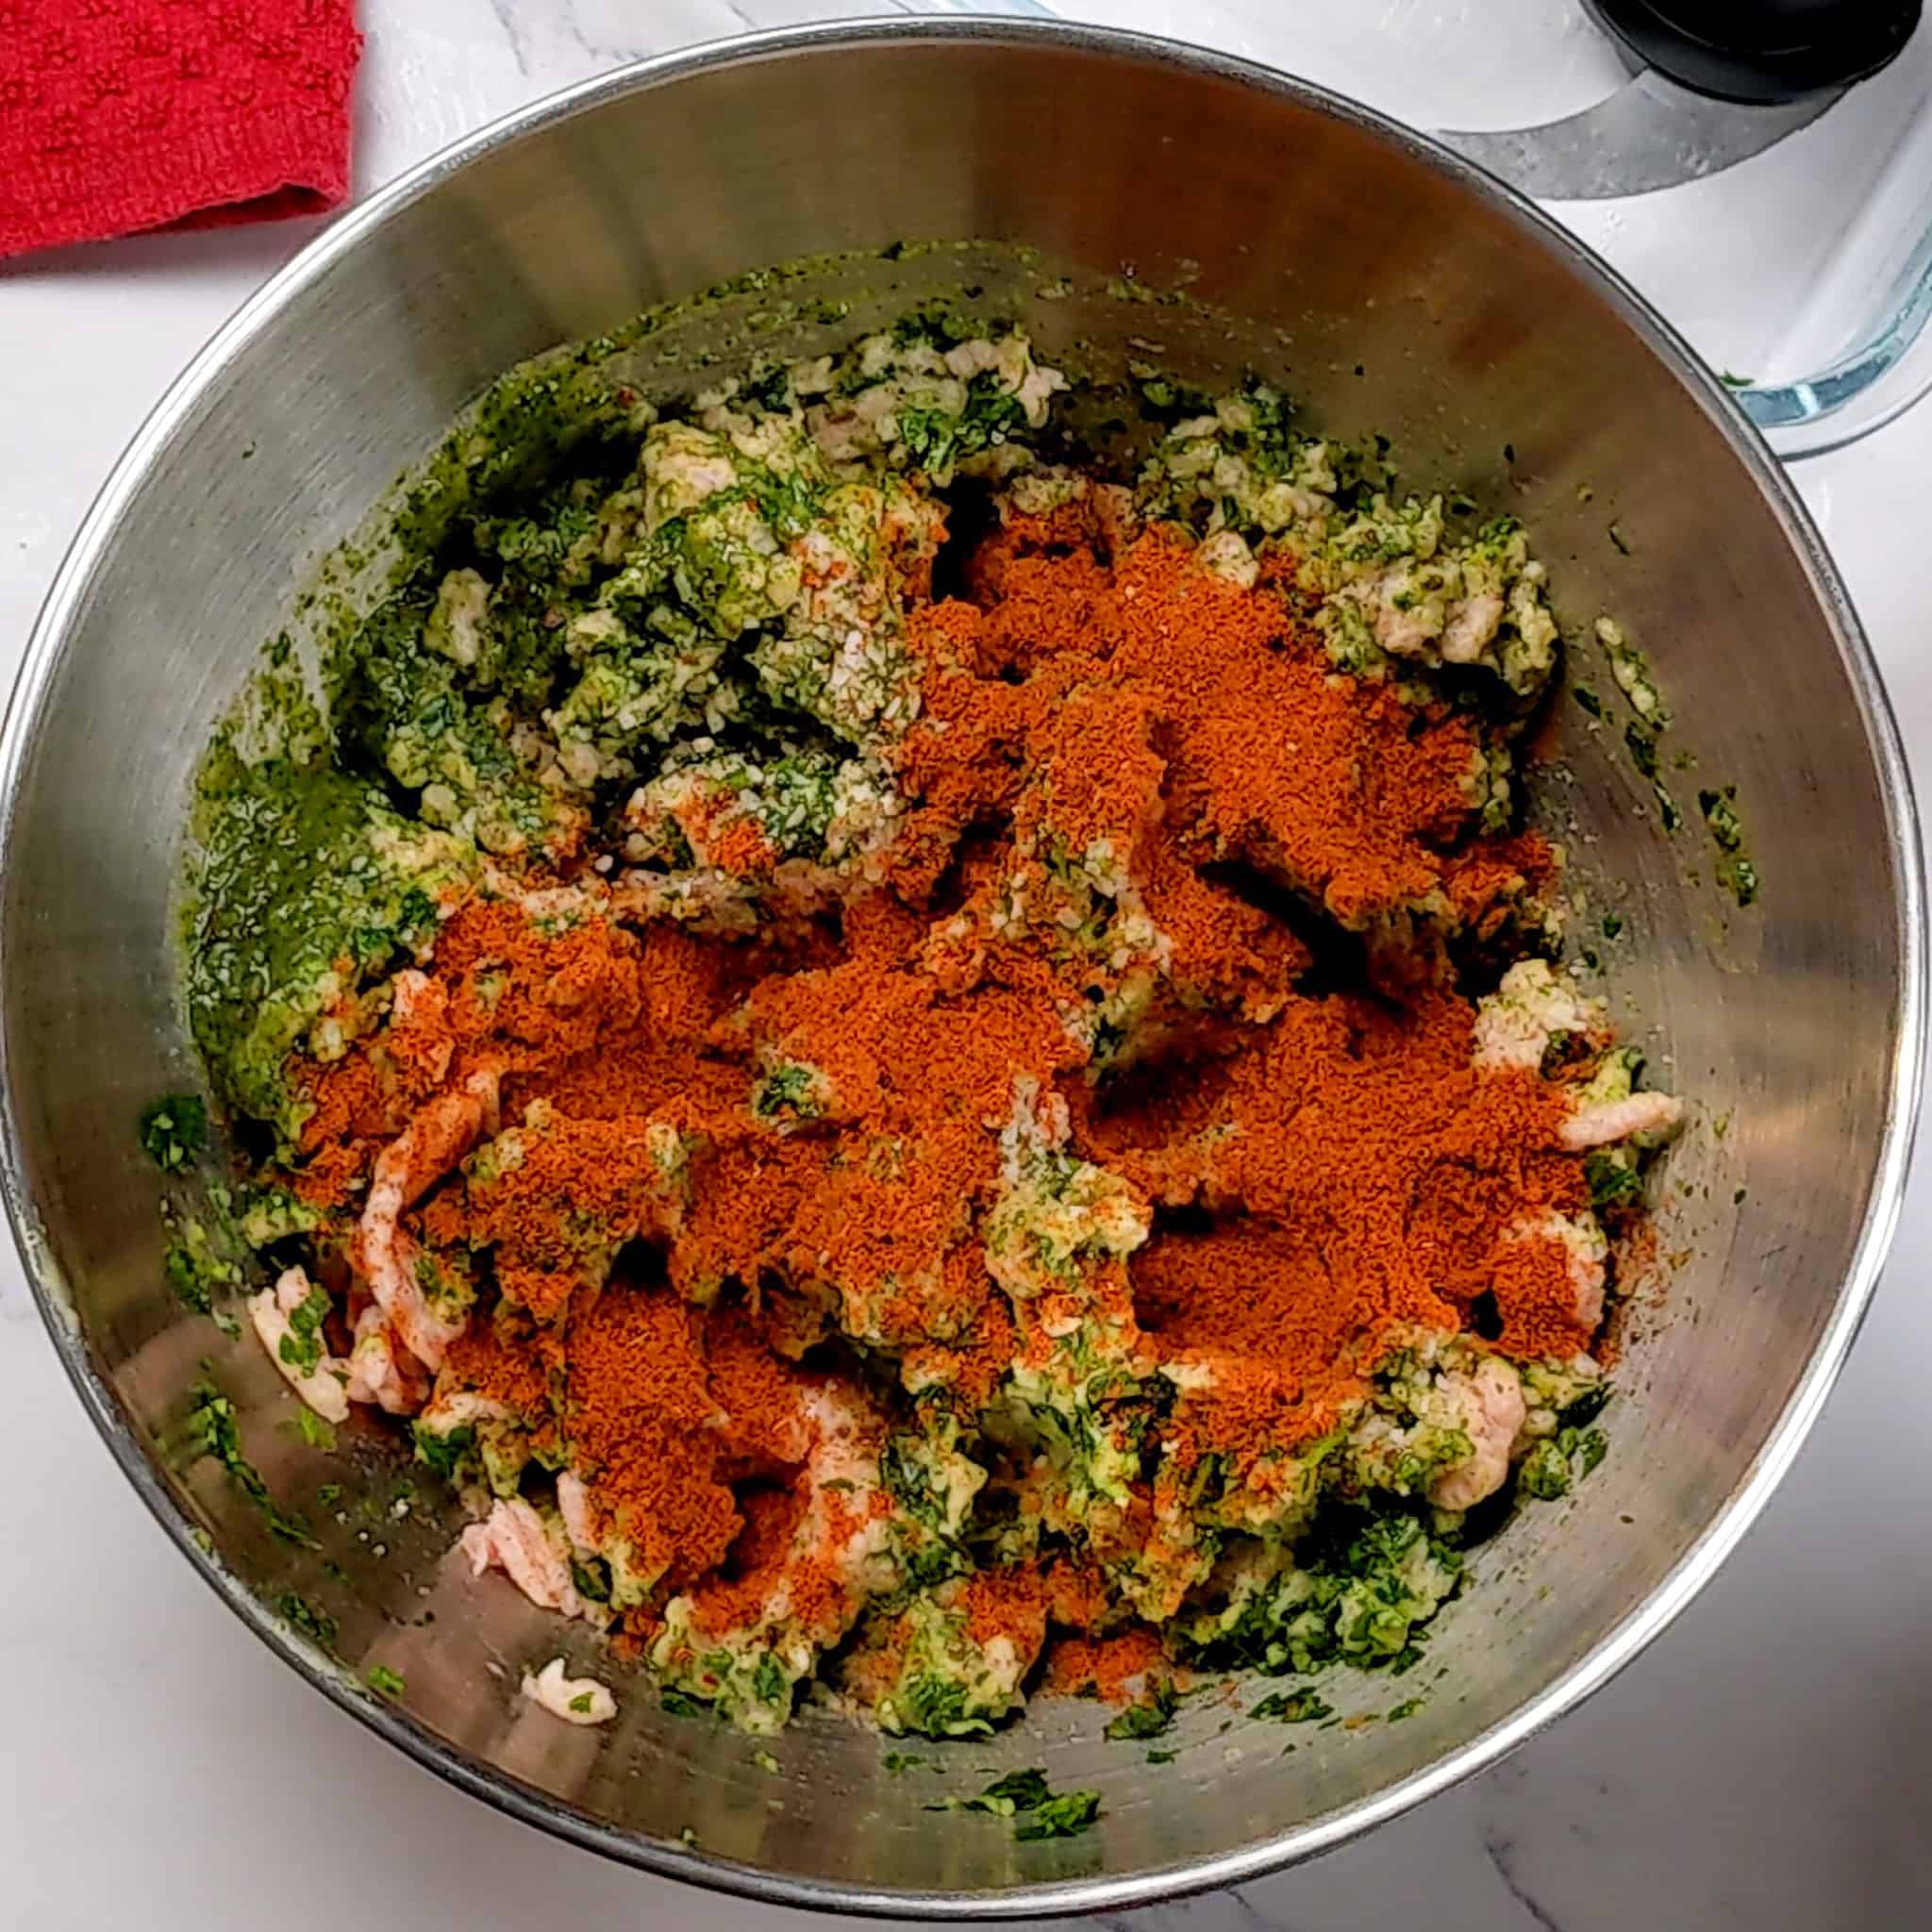 store bought ground chicken with zhug, and an aromatic paste of parsley, shallots and garlic in a stainless steel mixing bowl combined with baharat seasoning added.